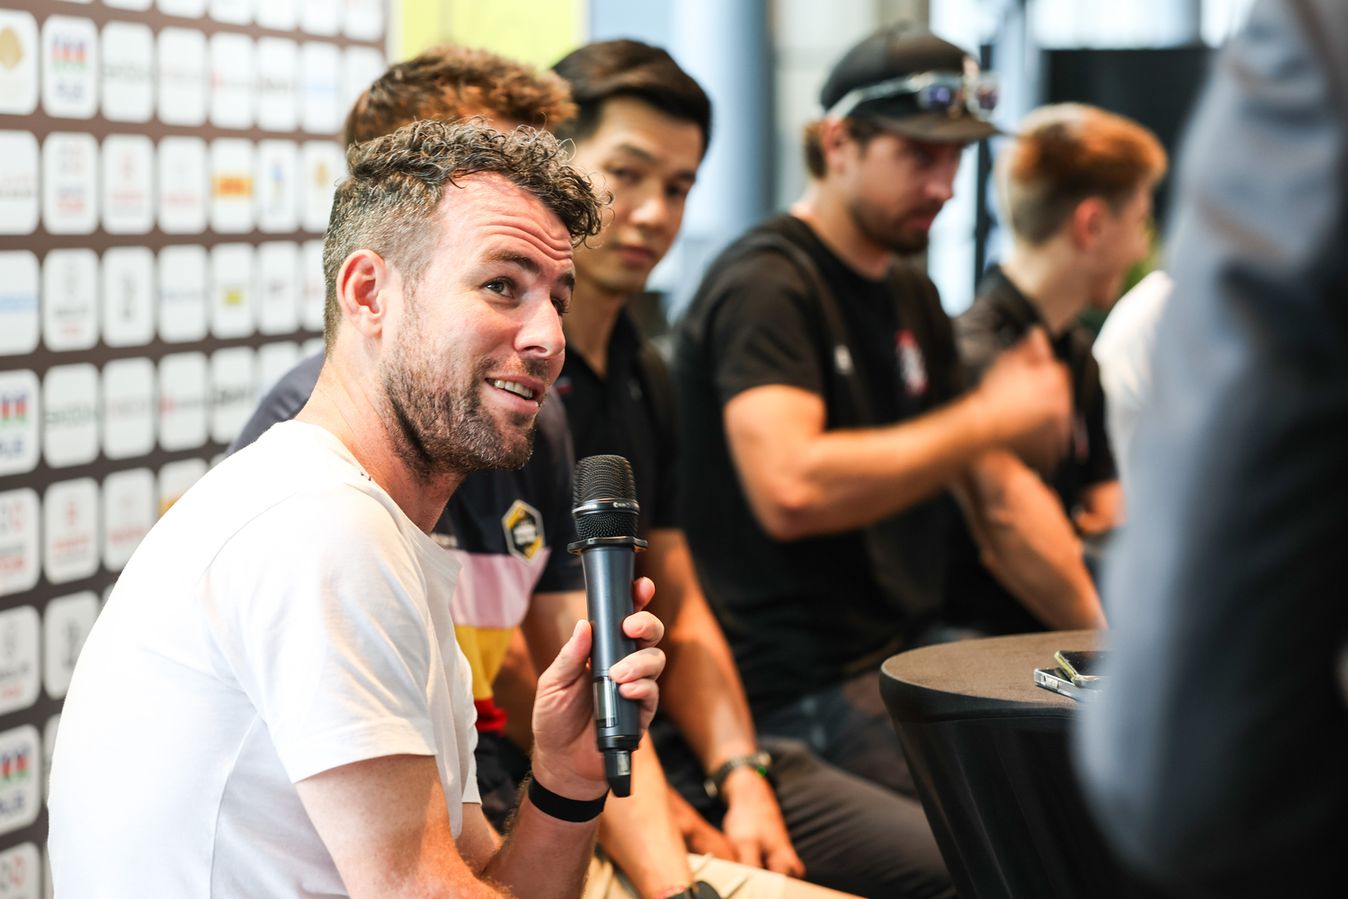 Mark Cavendish does not fulfil many media engagements these days, which makes his conversation with Rich Roll all the more insightful